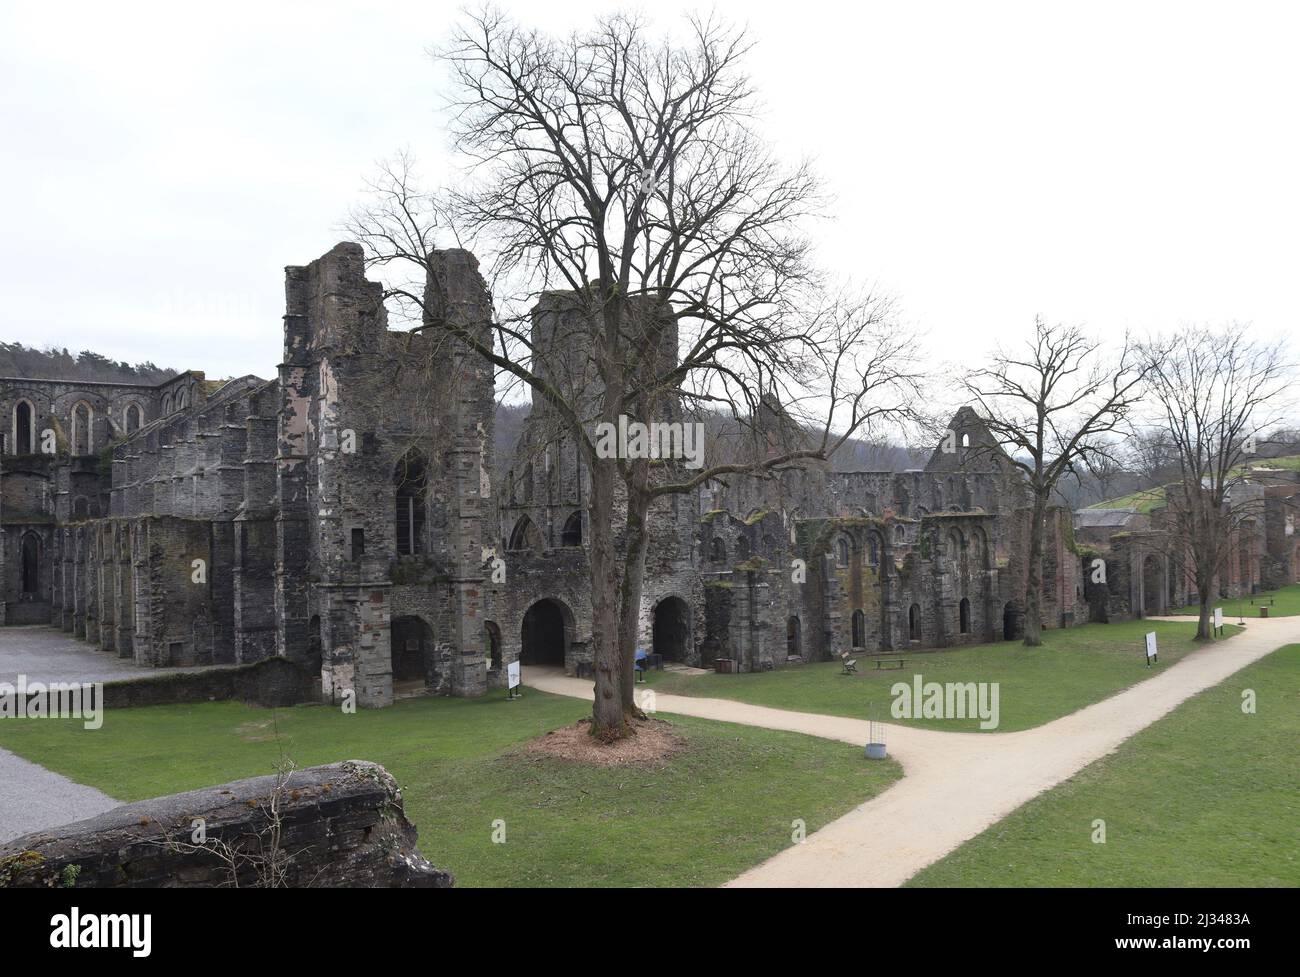 VILLERS-LA-VILLE, BELGIUM, 1 MARCH 2022: View of Villers Abbey near Brussels in Belgium. The 12th century ruins of the Cistercian Order Monastery are Stock Photo